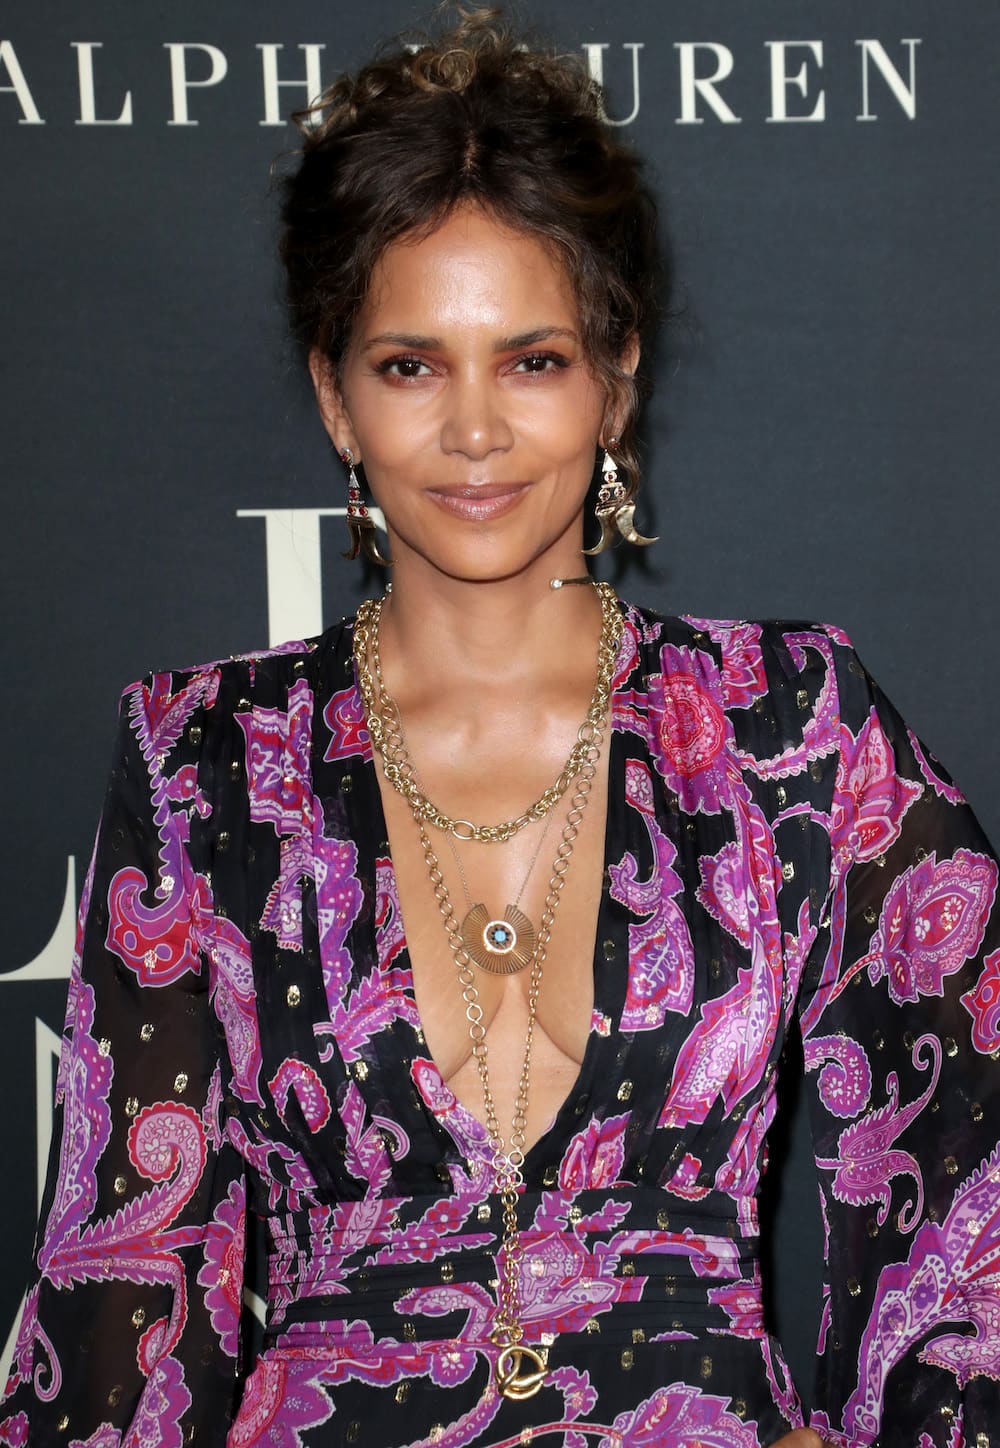 Halle Berry & Kerry Washington at Elle’s 2021 Women in Hollywood Celebration